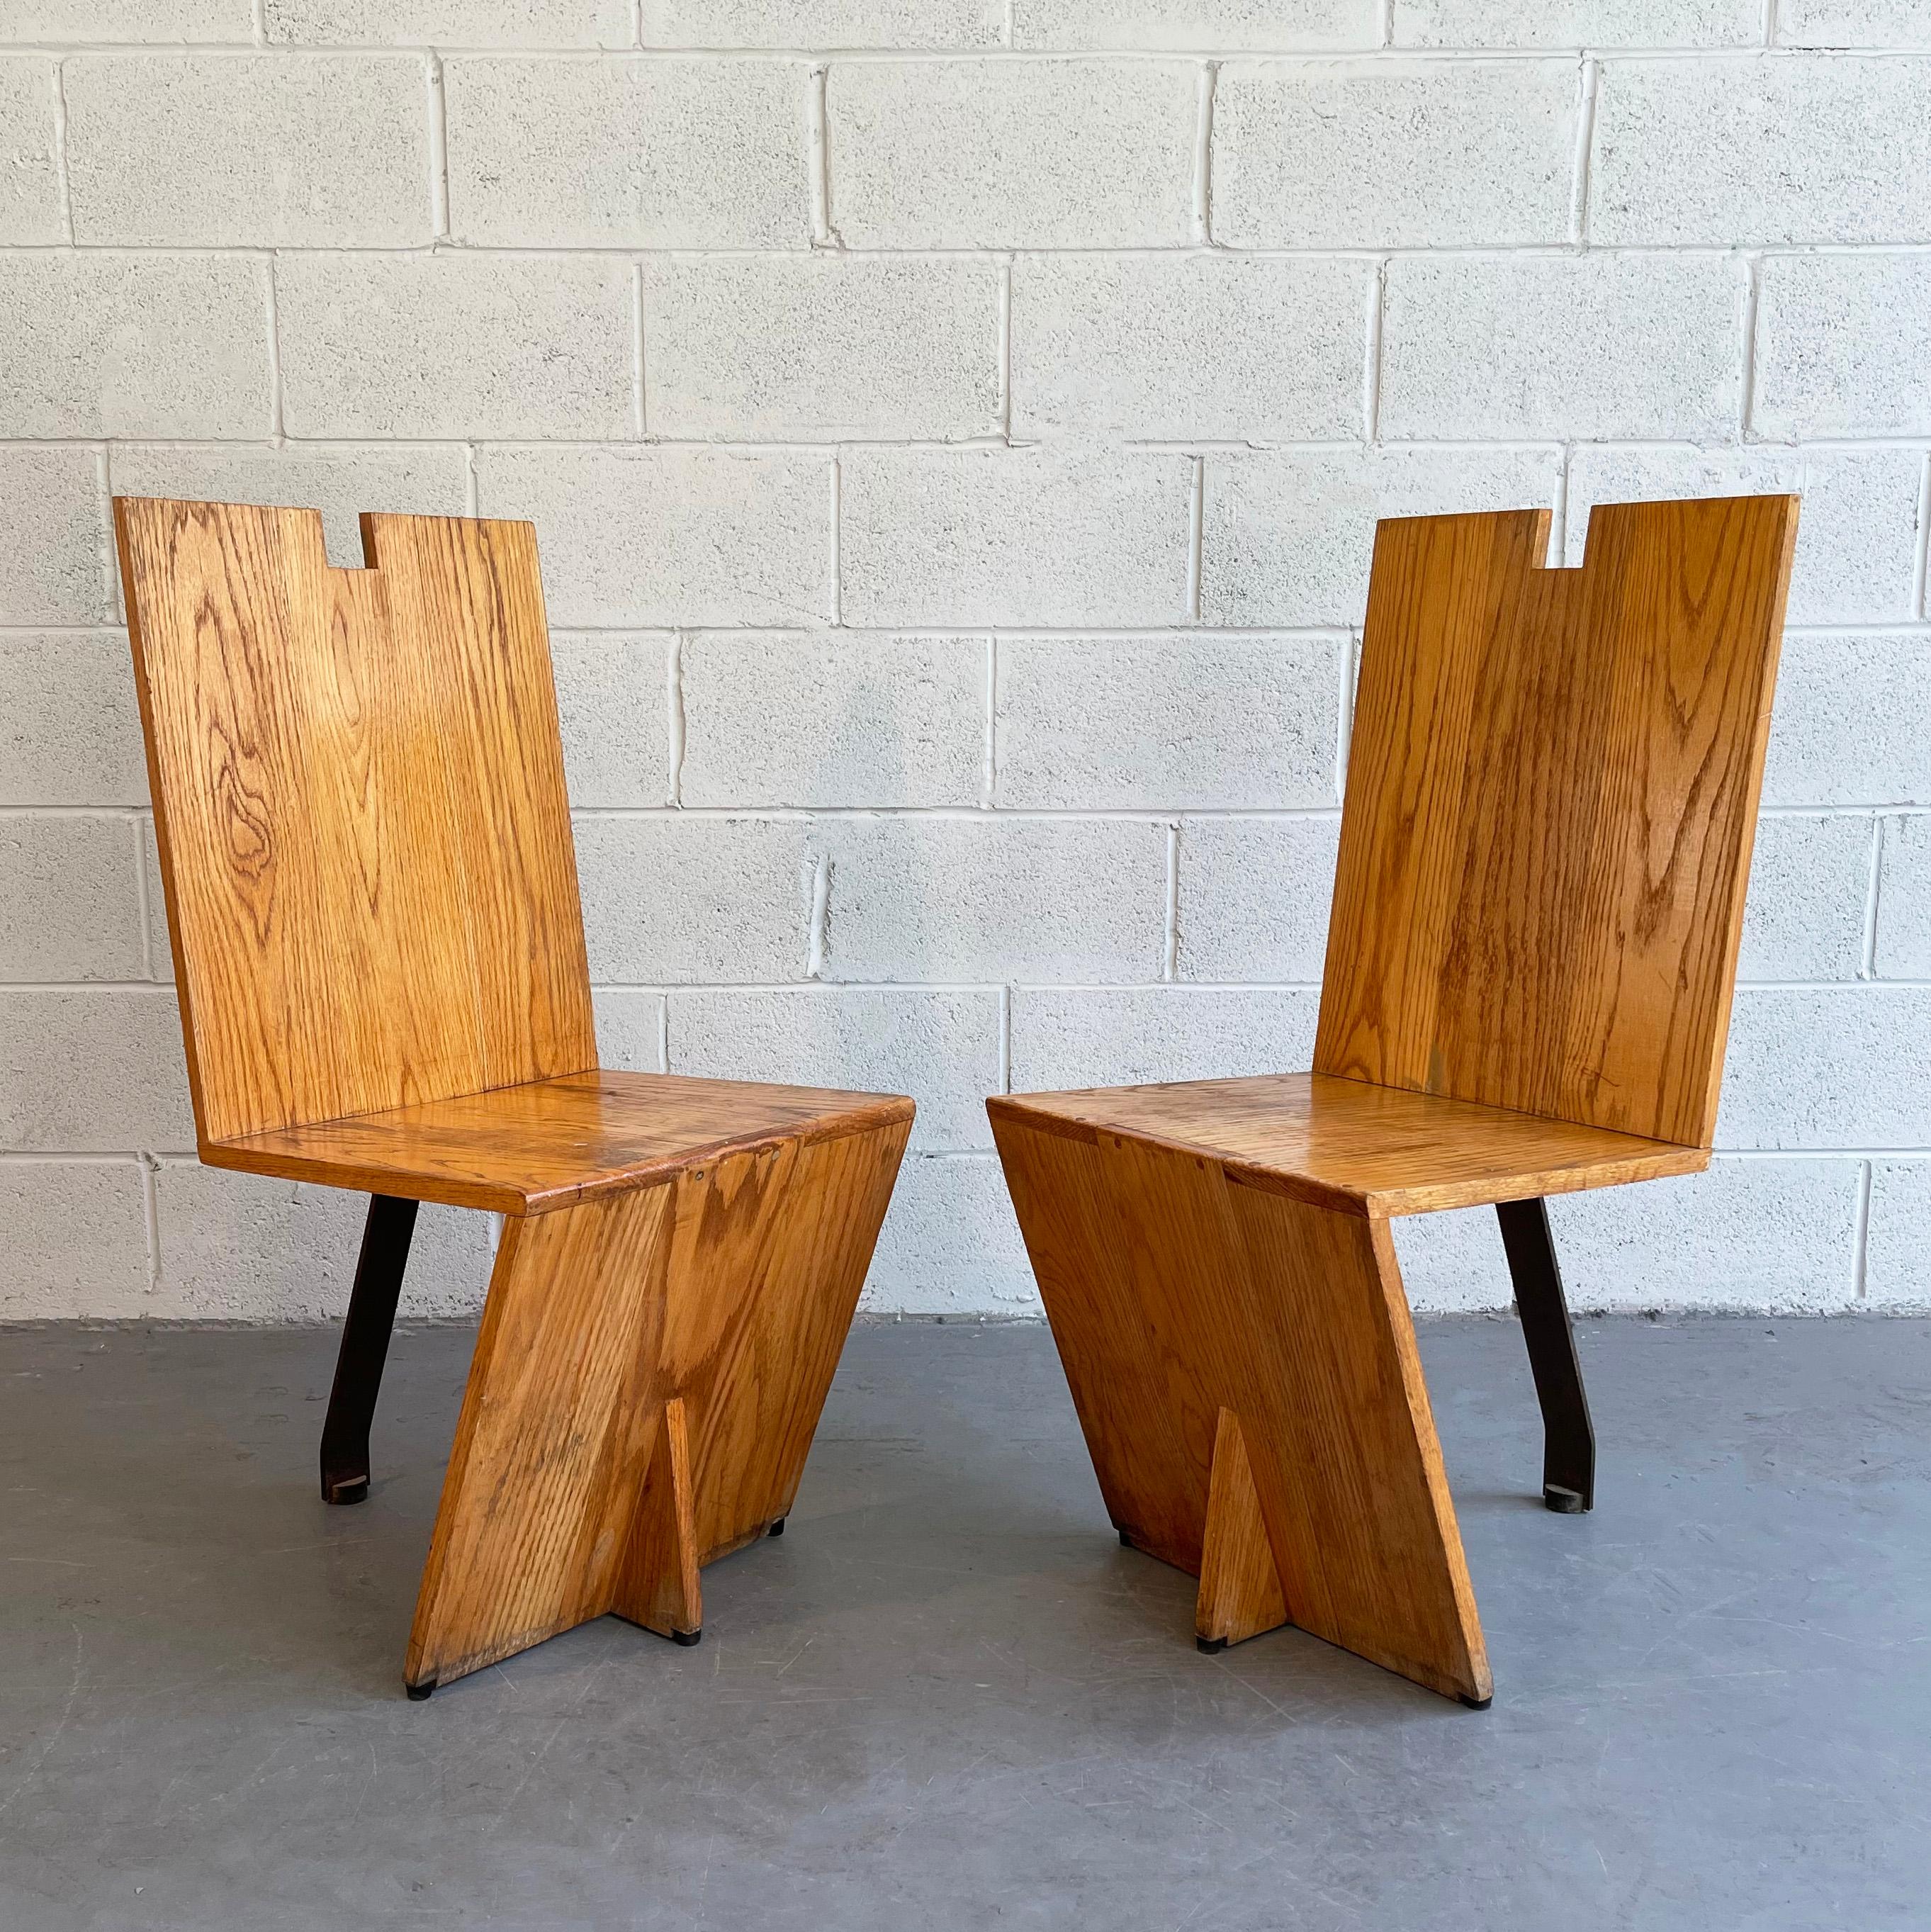 Pair of minimal, post modern, artisan-made chairs feature angular oak backs, seats and fronts with a single steel leg in back. Interesting from all angles.